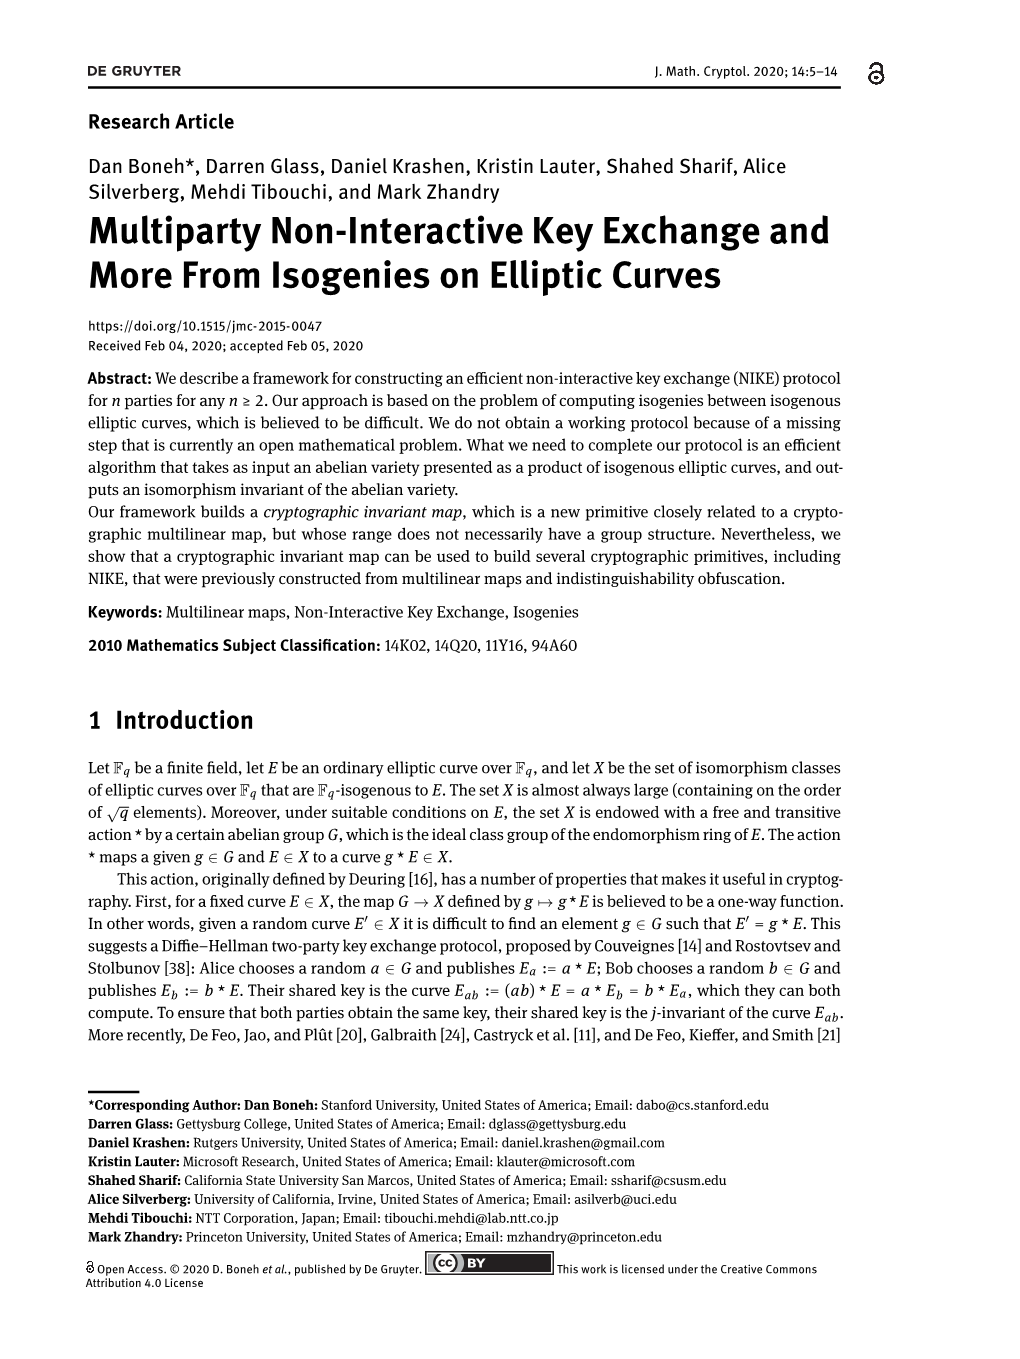 Multiparty Non-Interactive Key Exchange and More From